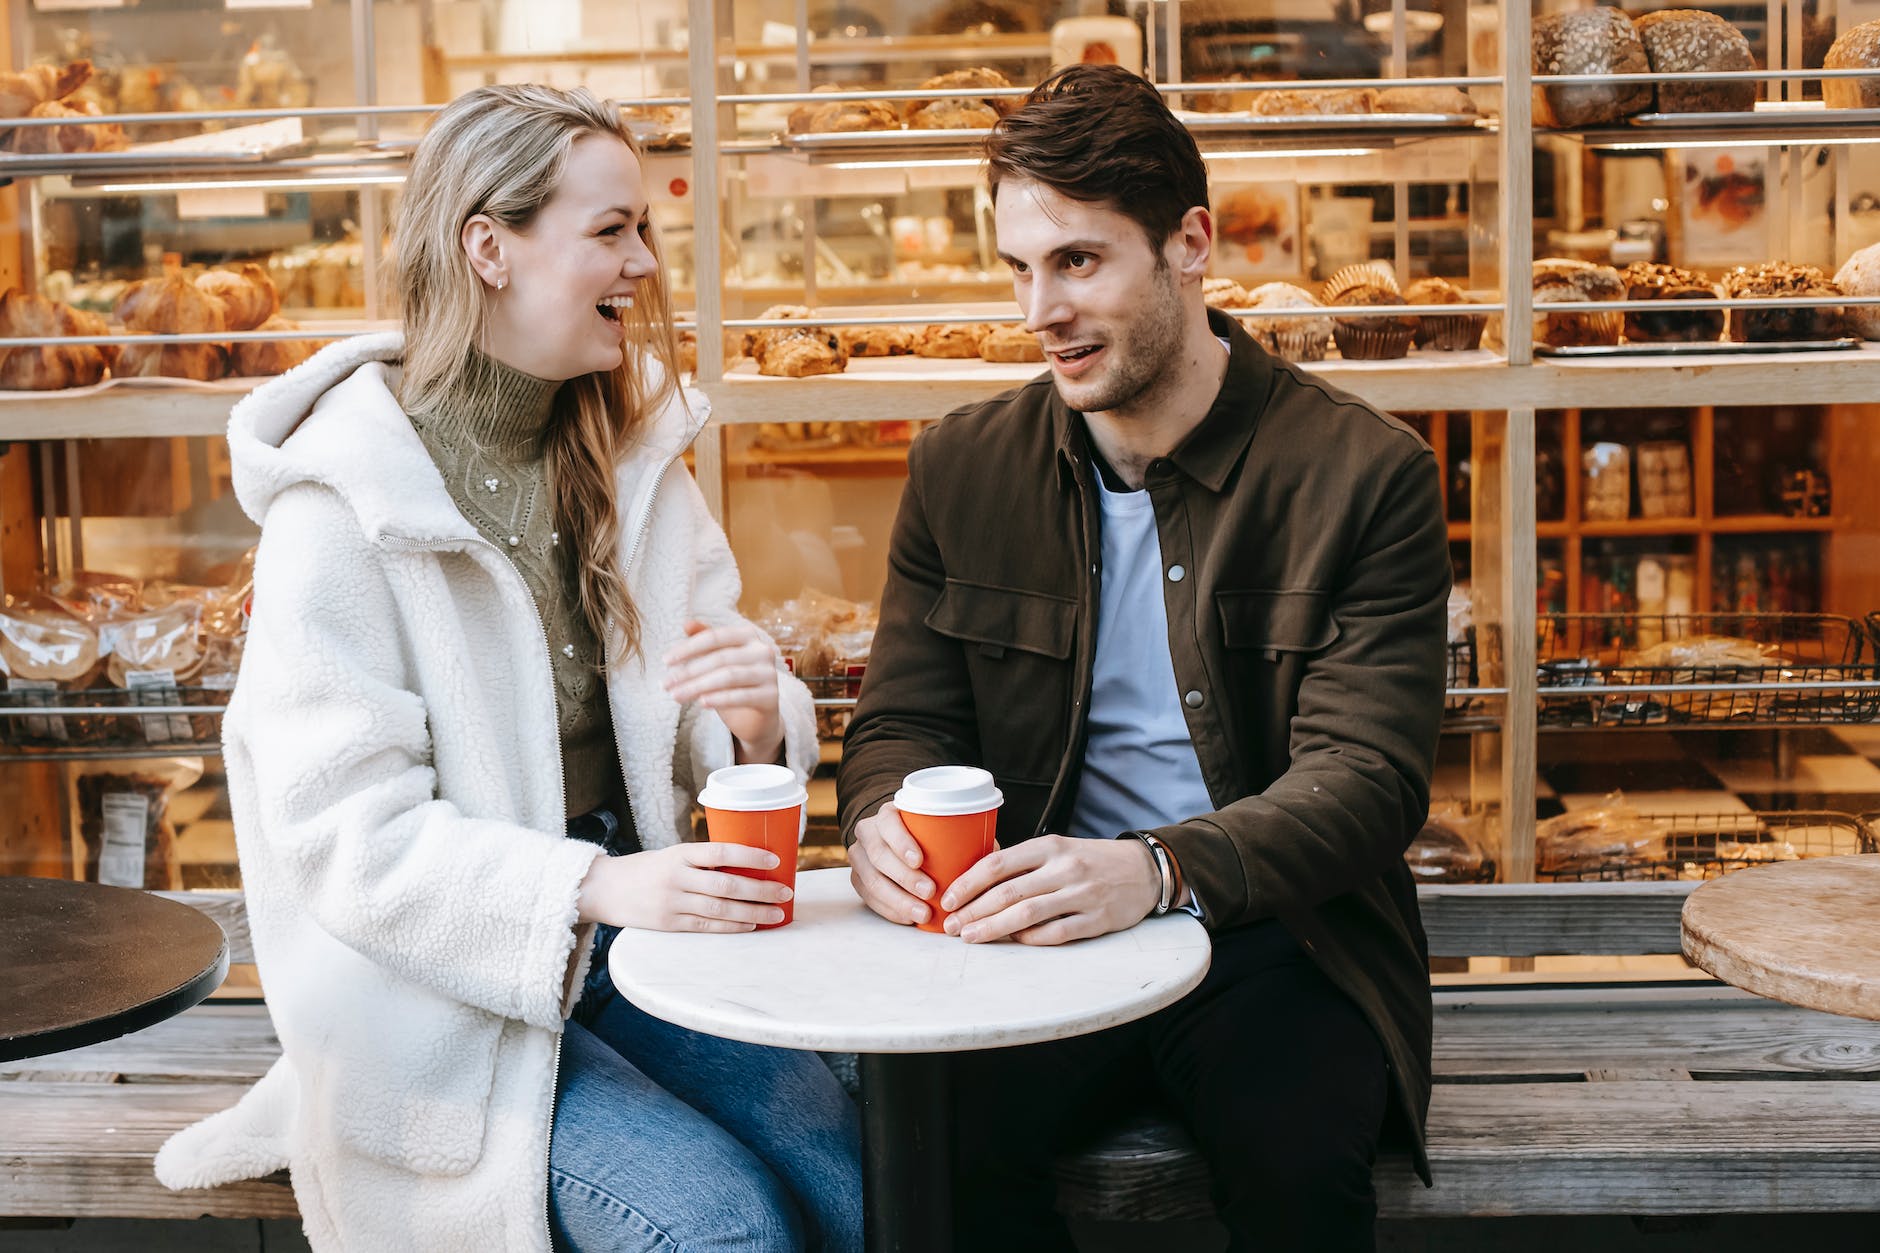 laughing woman talking with boyfriend during date in bakery